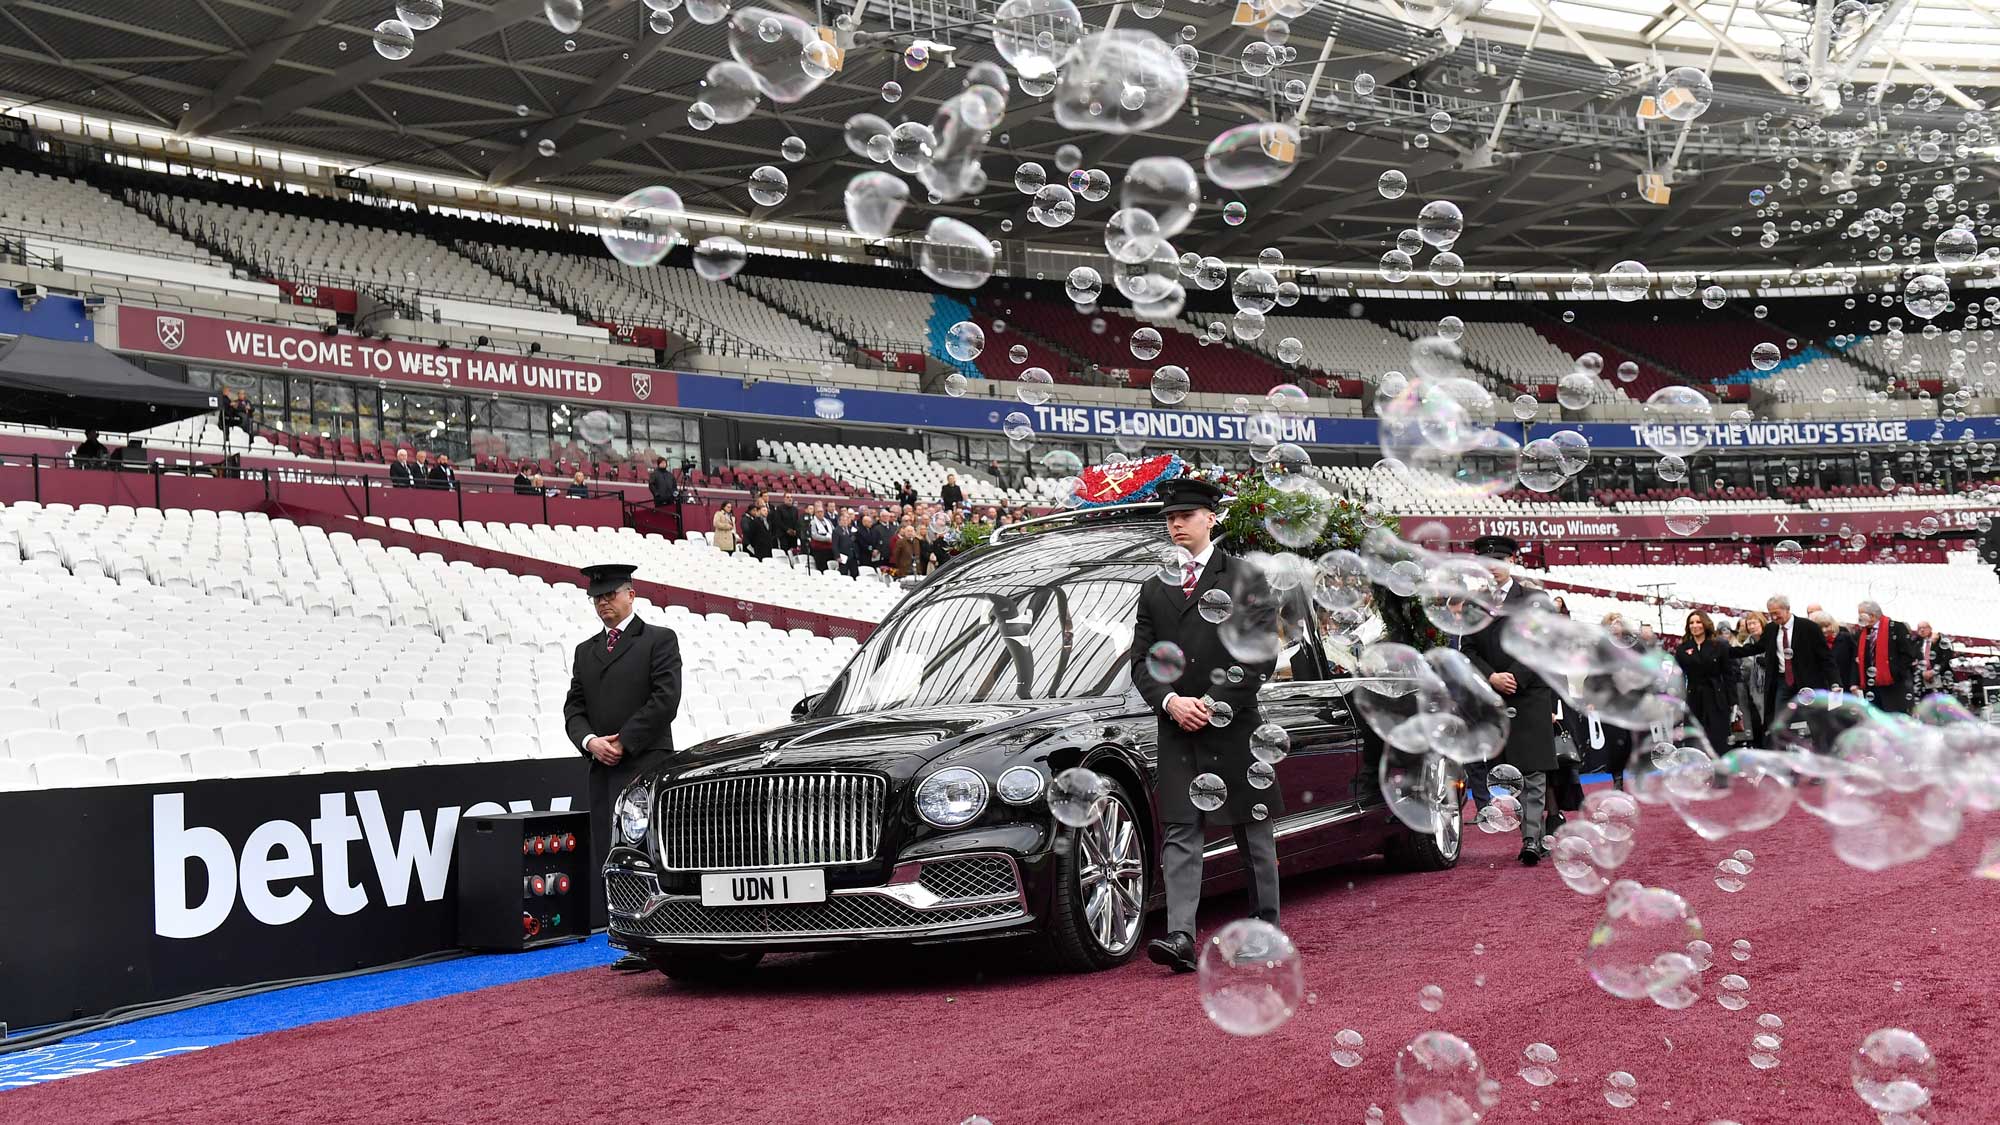 A memorial service for David Gold was held at London Stadium